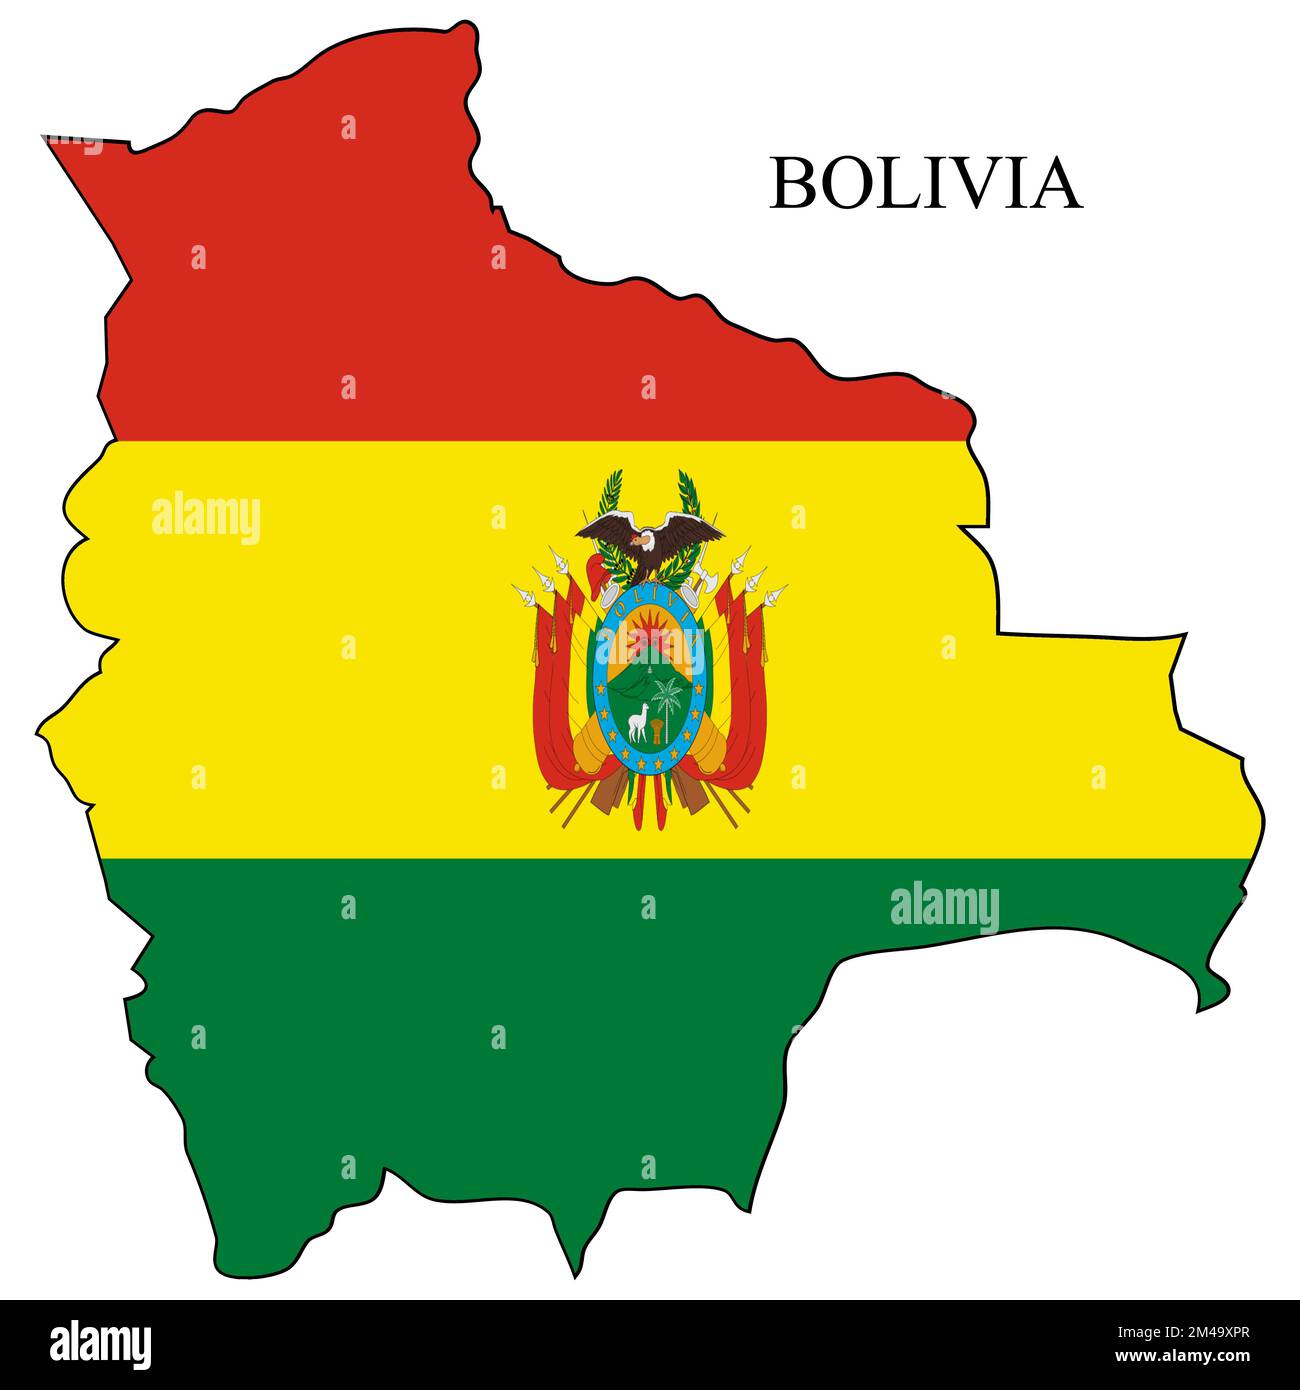 Bolivia map vector illustration. Global economy. Famous country. South America. Latin America. America. Stock Vector